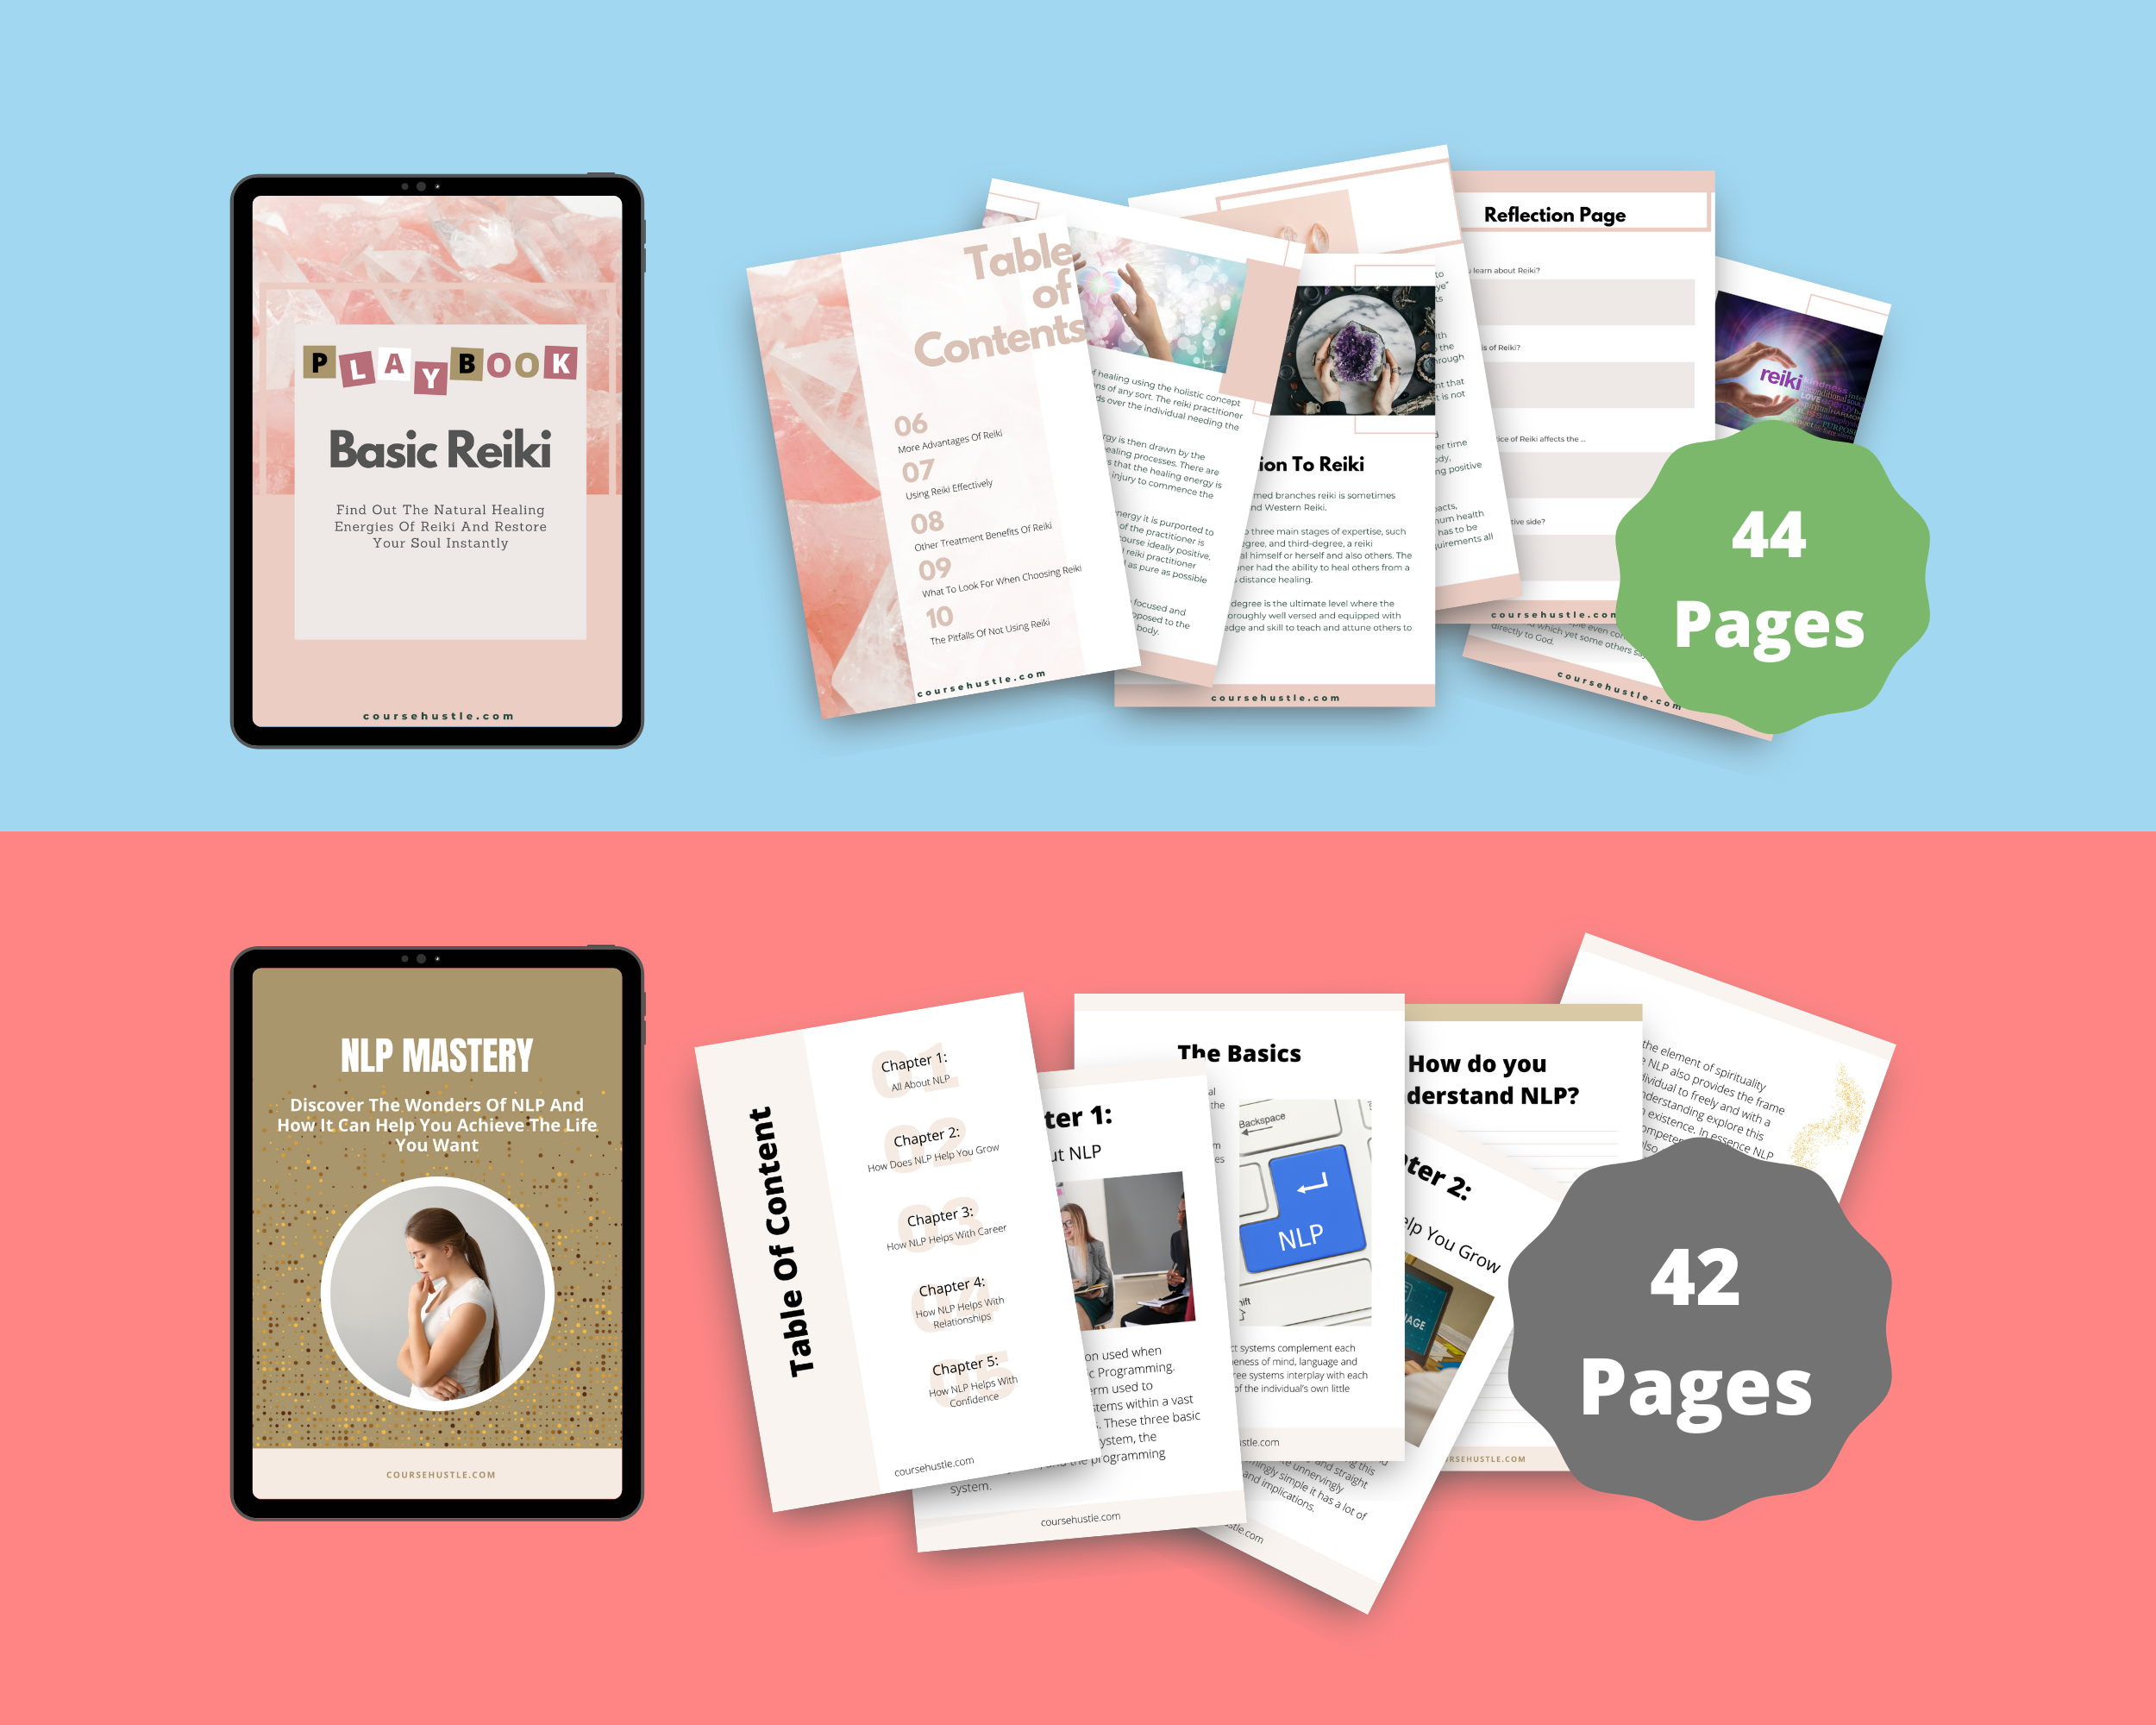 BUNDLE of 11 Coaching Playbooks in Canva | Customizable | Editable | Commercial Use | Coaching Templates